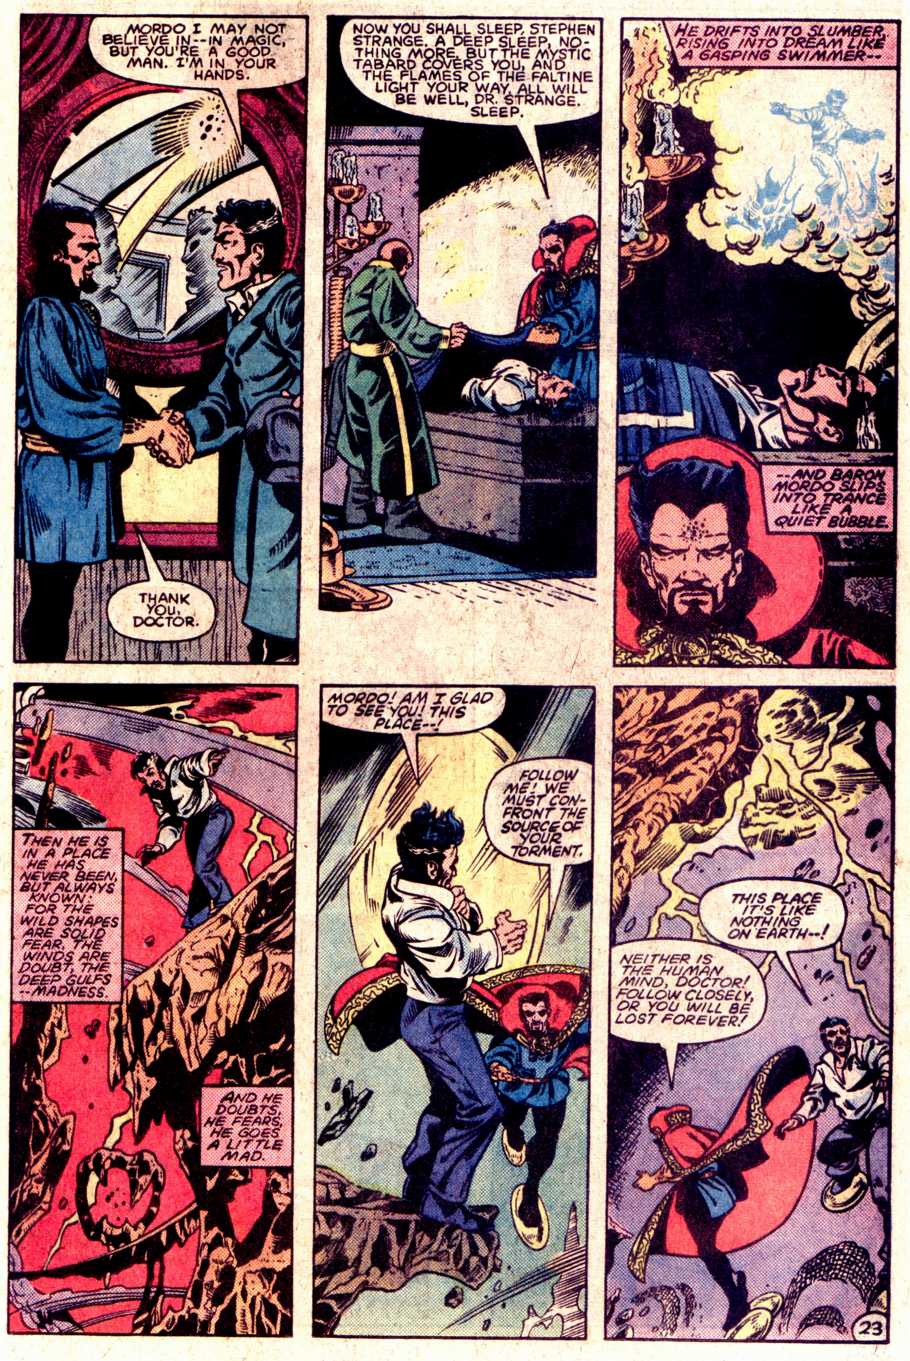 What If? (1977) issue 40 - Dr Strange had not become master of The mystic arts - Page 24